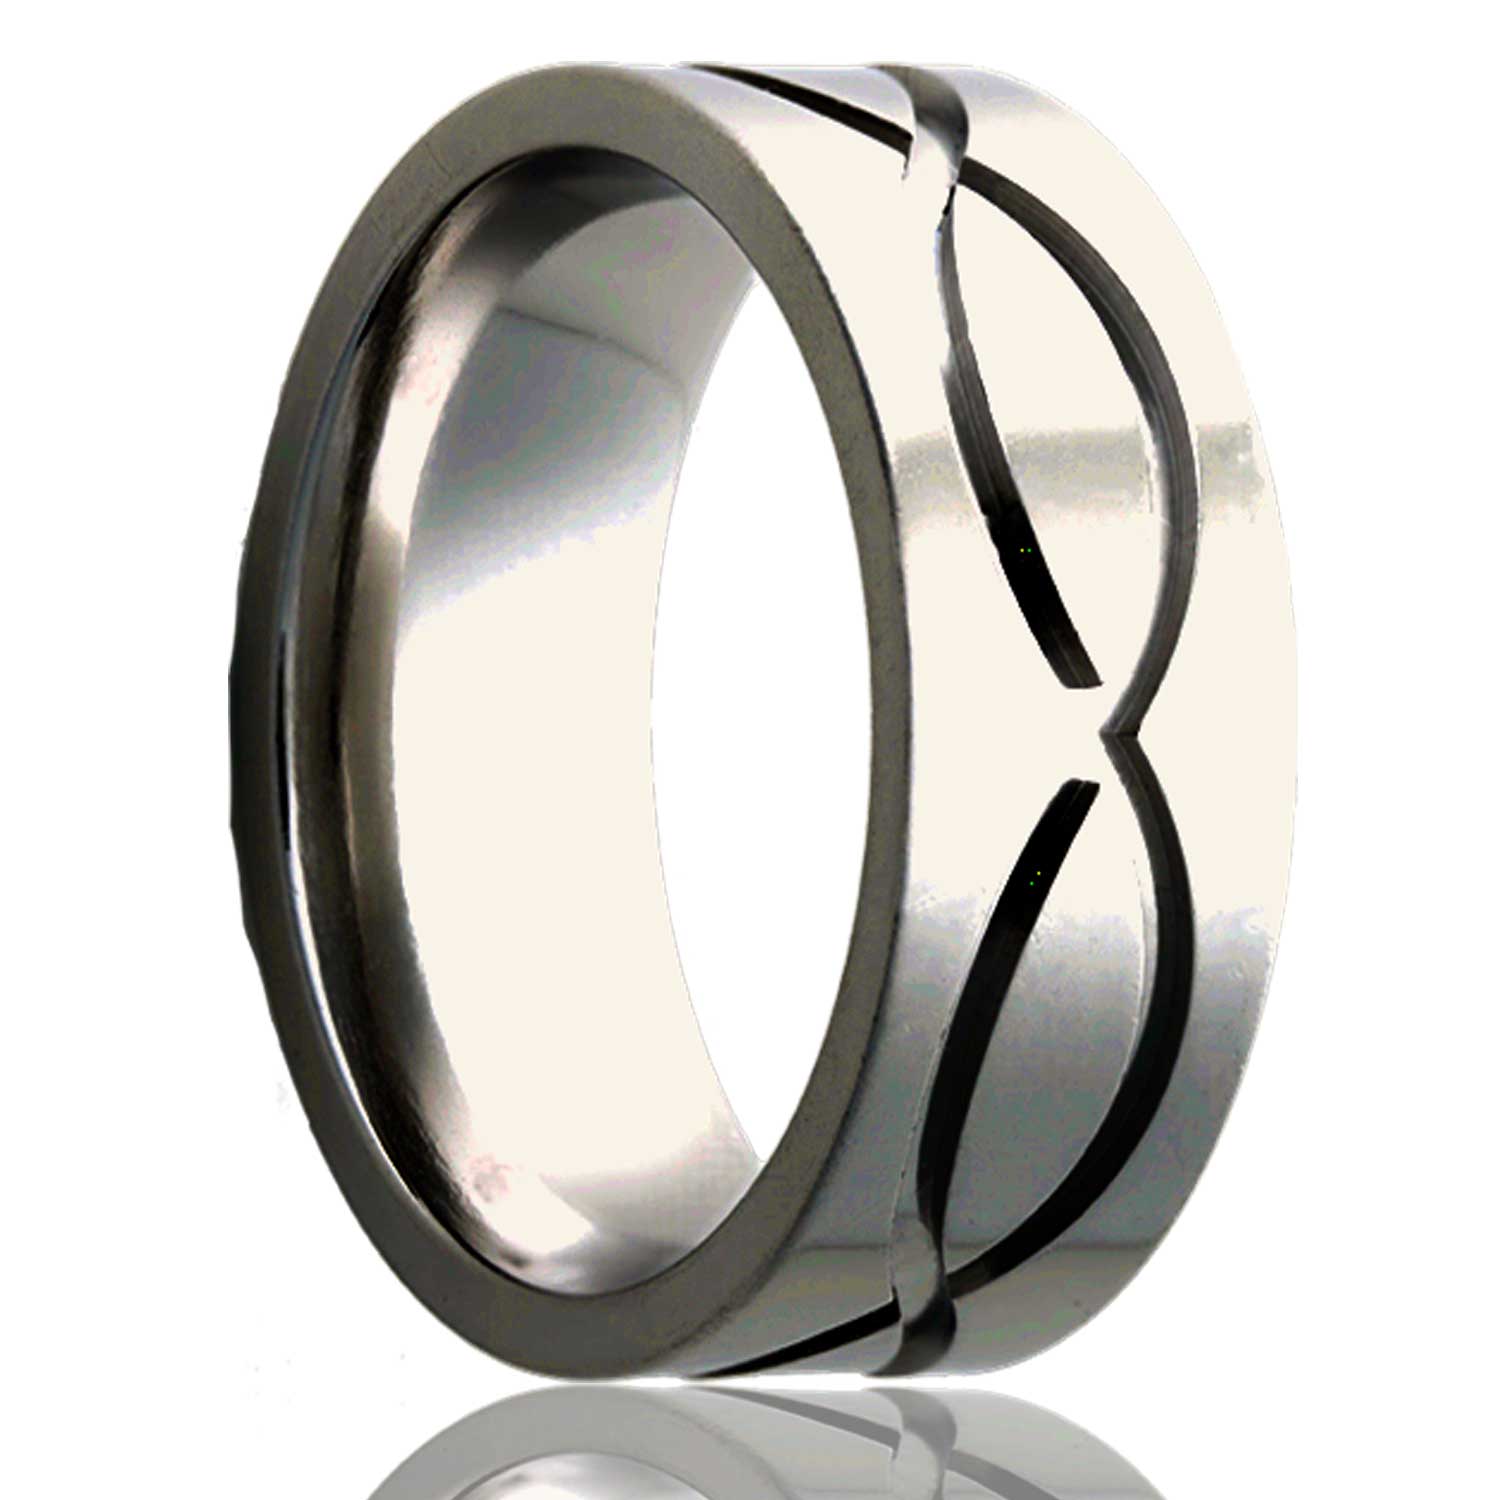 A infinity waves titanium wedding band displayed on a neutral white background.